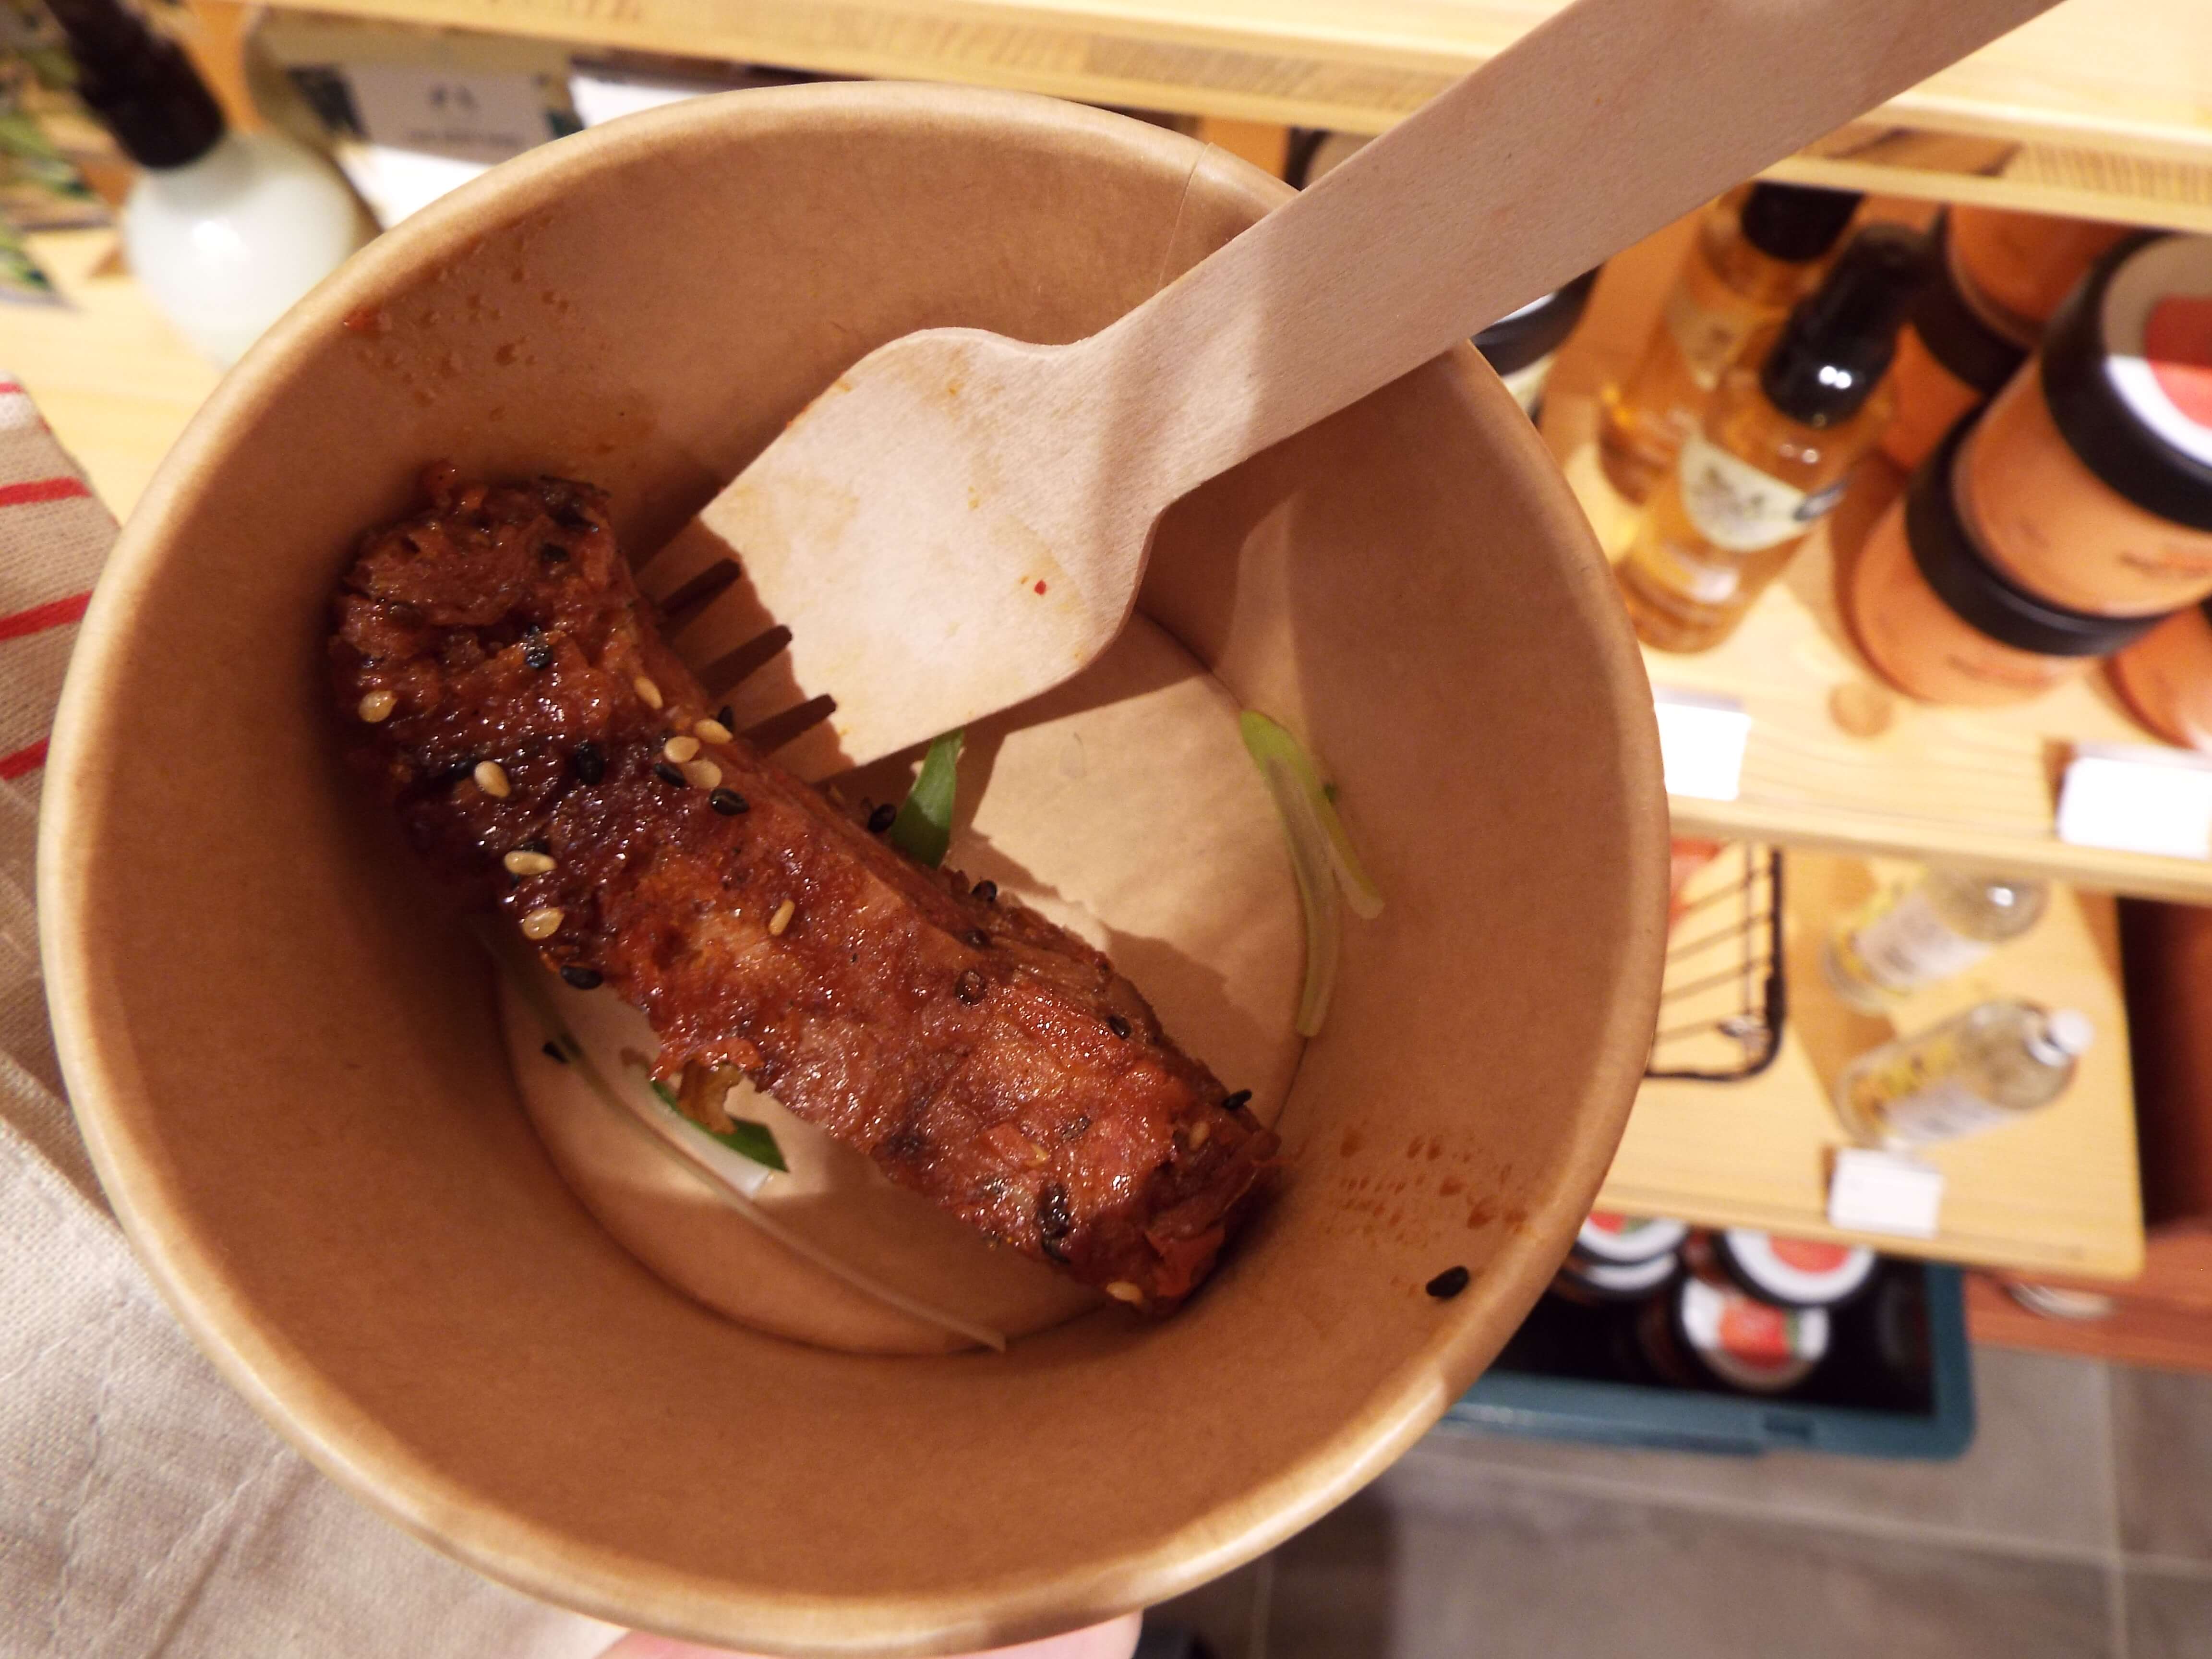 A Birdseye view of the vegan sticky ribs, in a little brown paper tub, seasoned with sesame seeds, with mini wooden fork, amongst the display of beauty products.